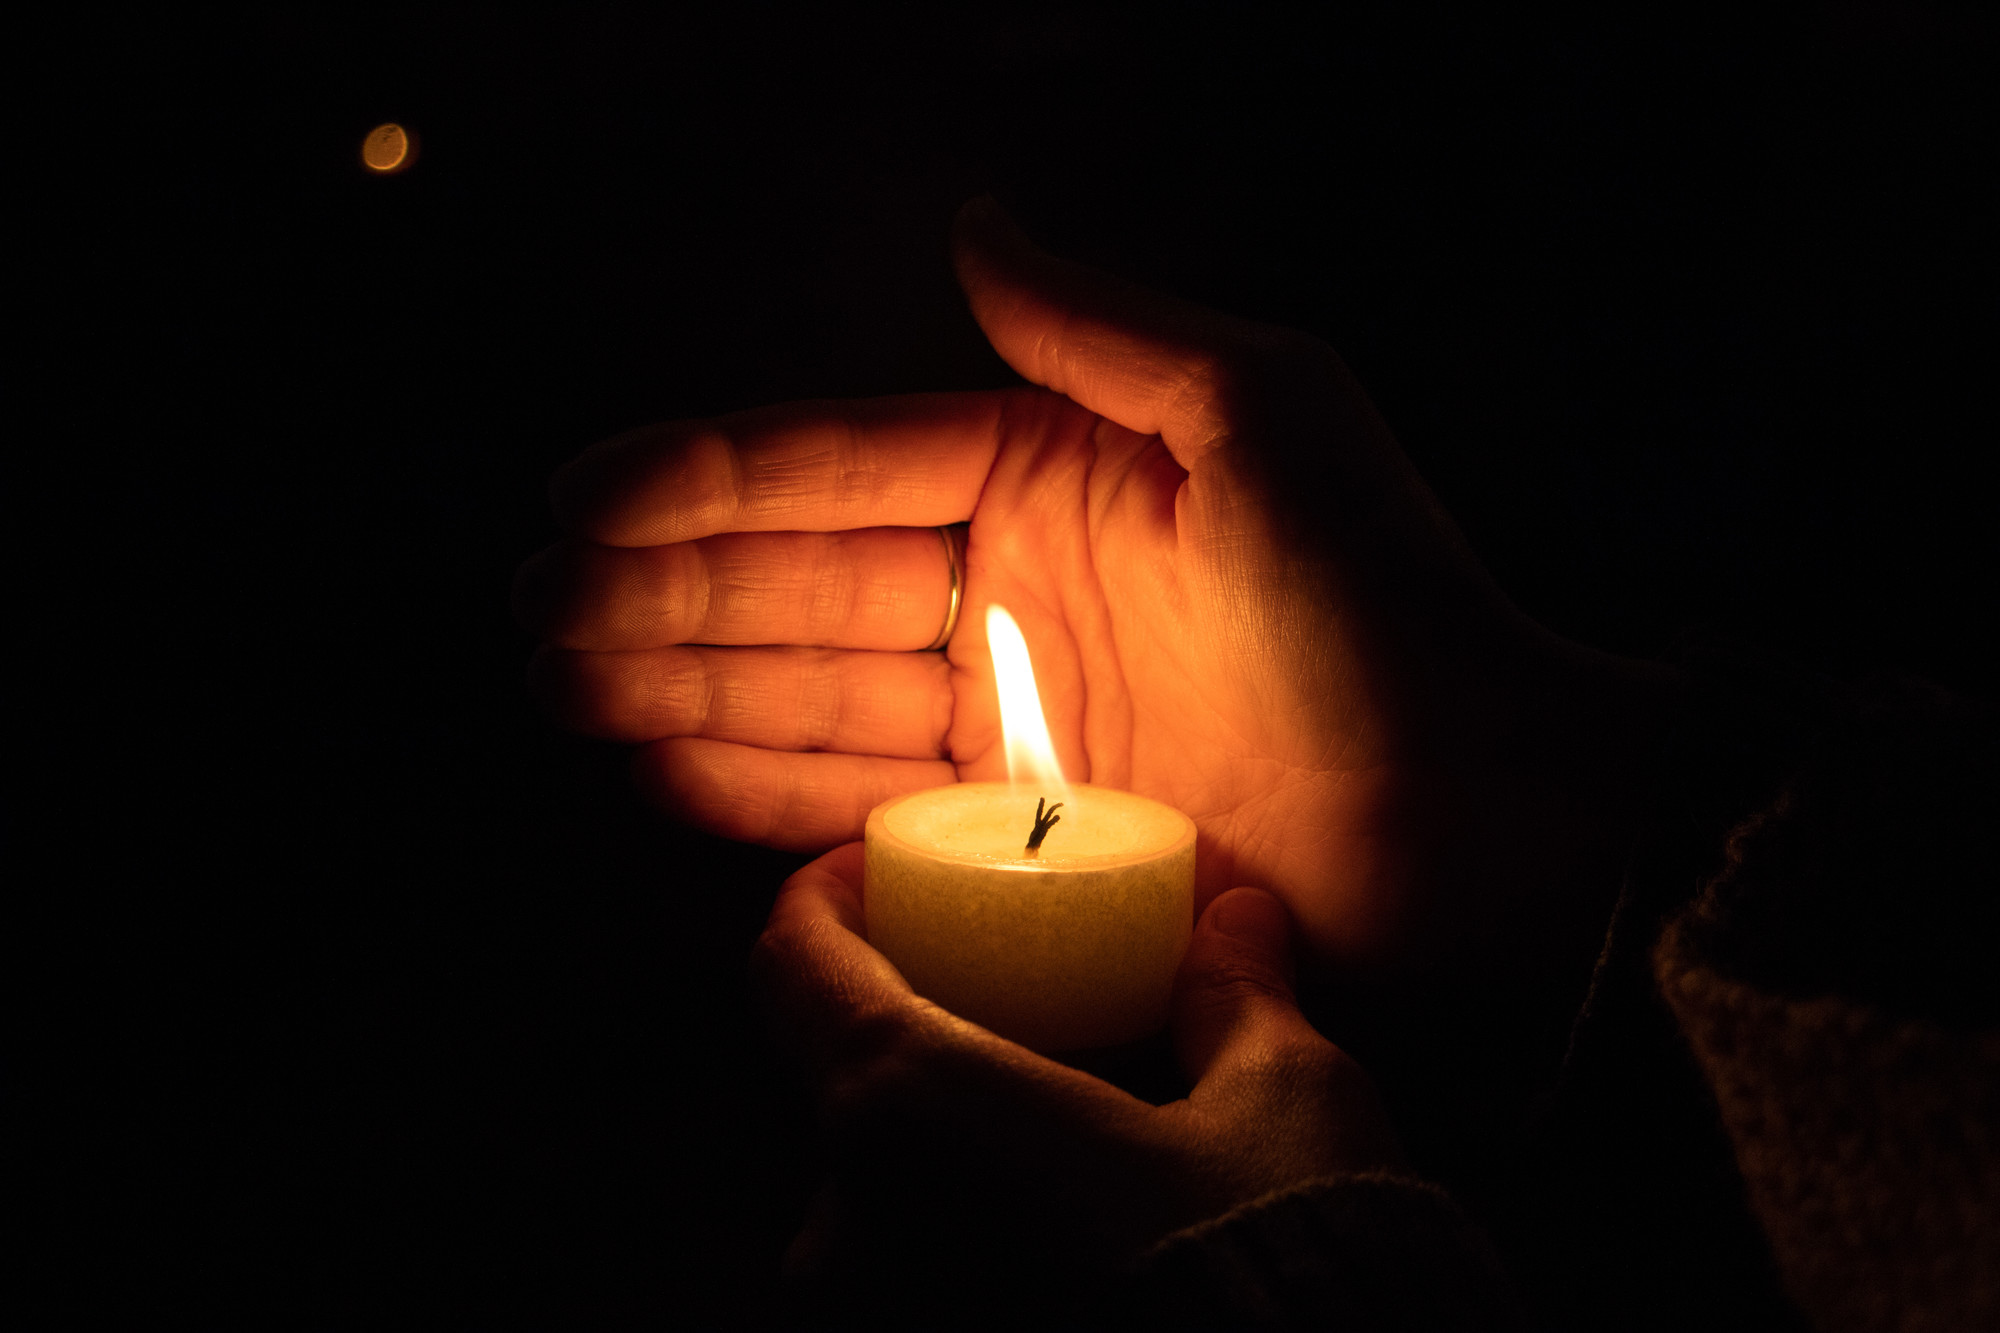 A hand shielding a lit candle from the wind with darkness all around.